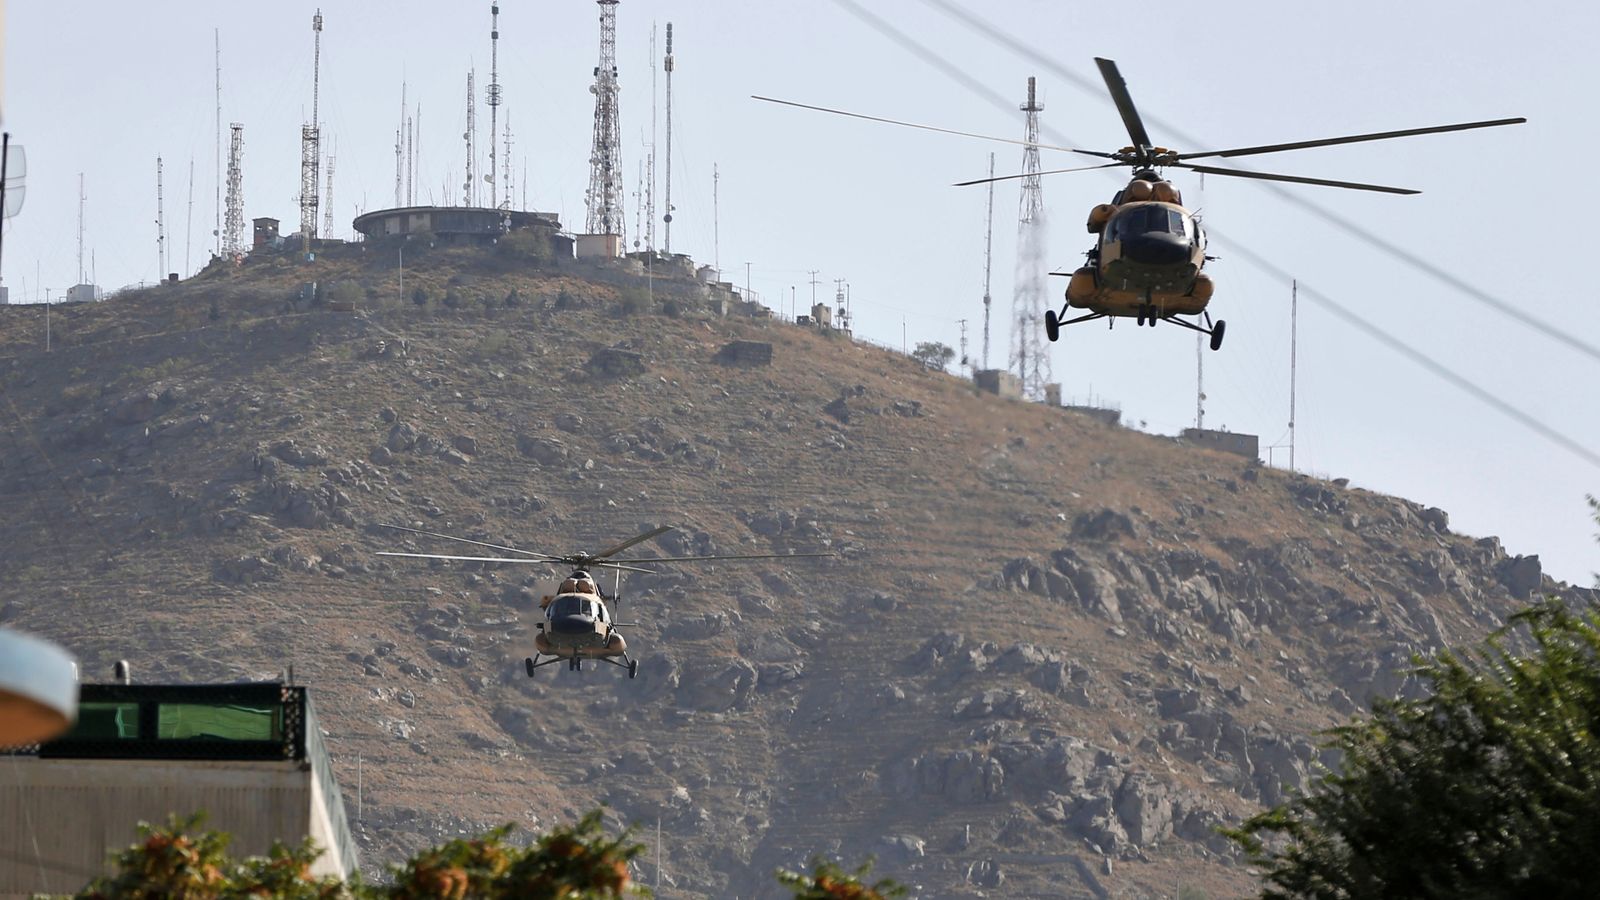 Twenty-five people killed in Afghanistan army helicopter crash